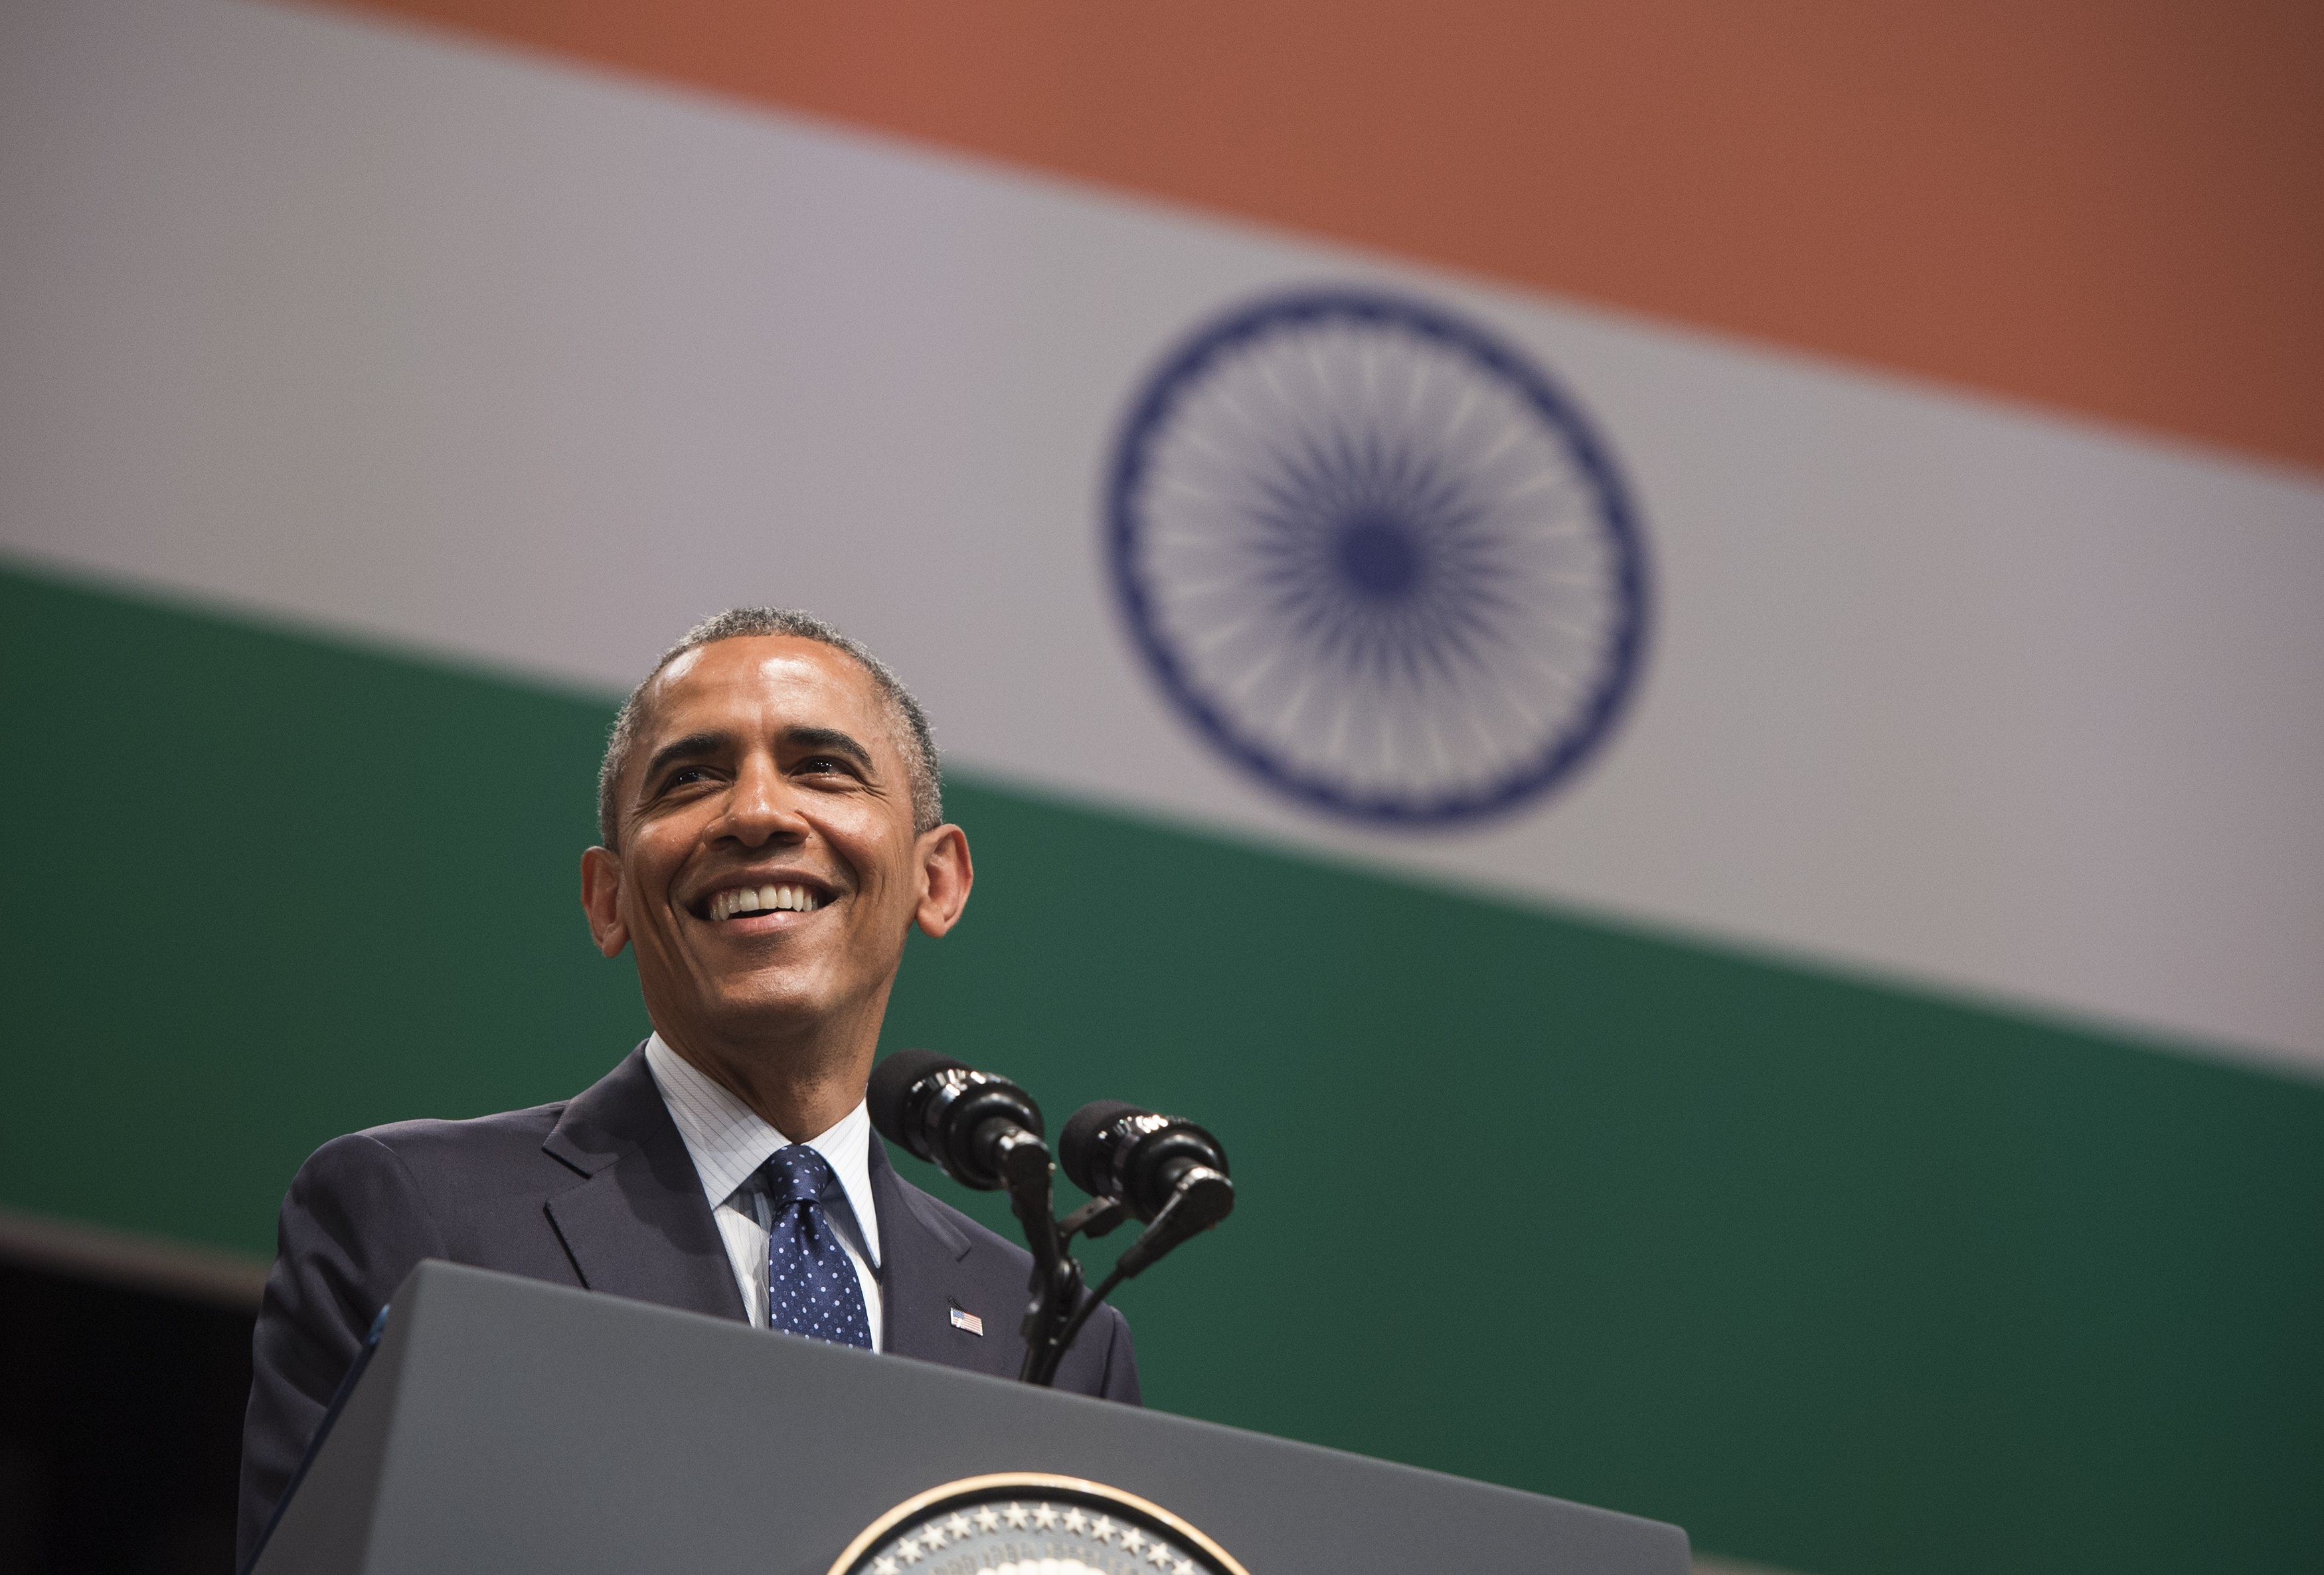 US President Barack Obama speaks on US - India relations during a townhall event at Siri Fort Auditorium in New Delhi on January 27, 2015. US President Barack Obama warned January 27 that the world does not &quot;stand a chance against climate change&quot; unless developing countries such as India reduce their dependence on fossil fuels. AFP PHOTO / SAUL LOEB        (Photo credit should read SAUL LOEB/AFP/Getty Images)